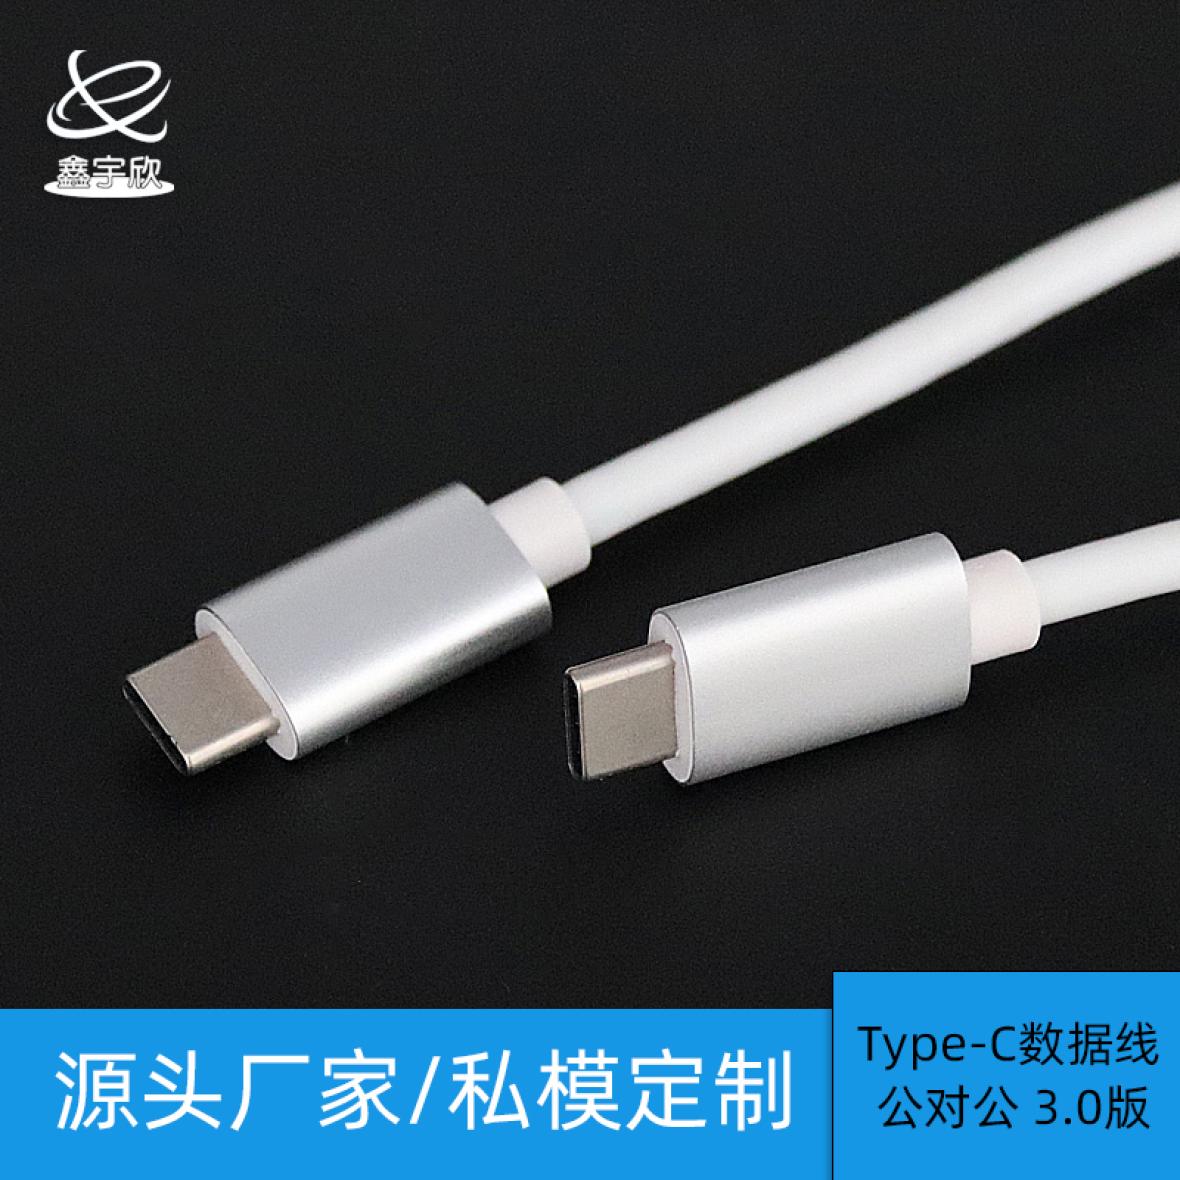  Double head Type-C male to male data cable aluminum alloy shell version 3.0